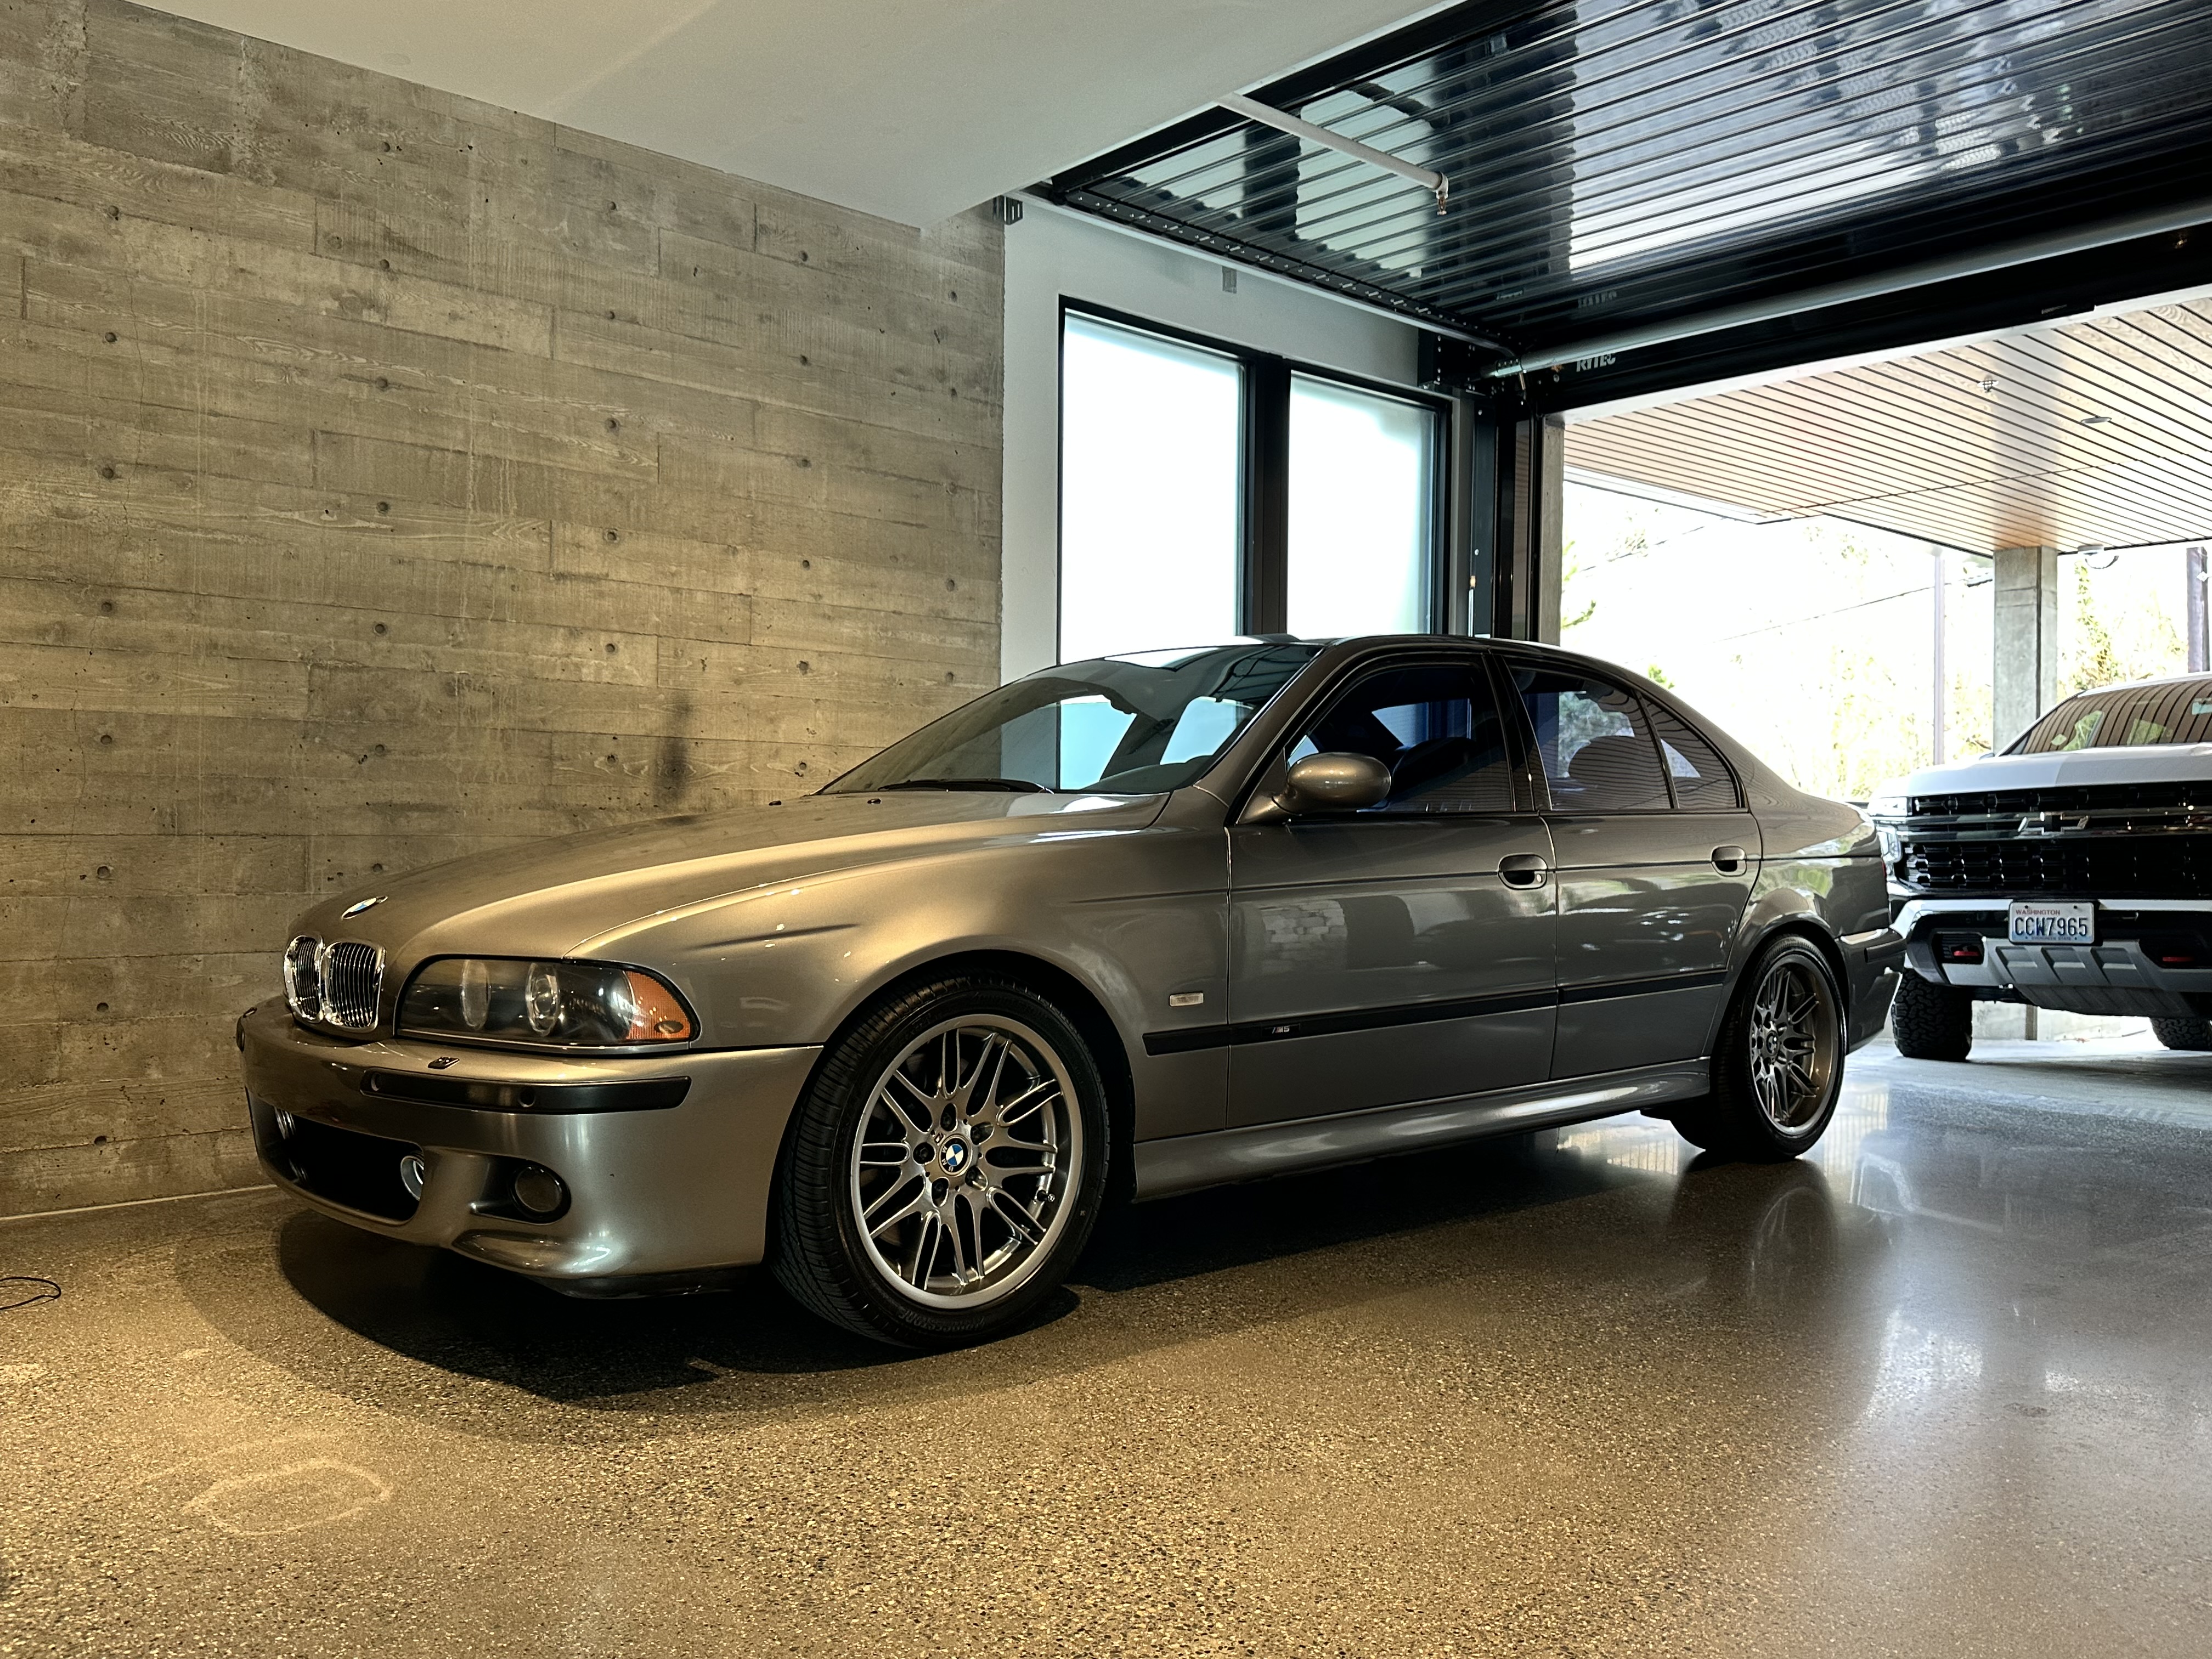 Used 2002 BMW M5 for Sale Right Now - Autotrader